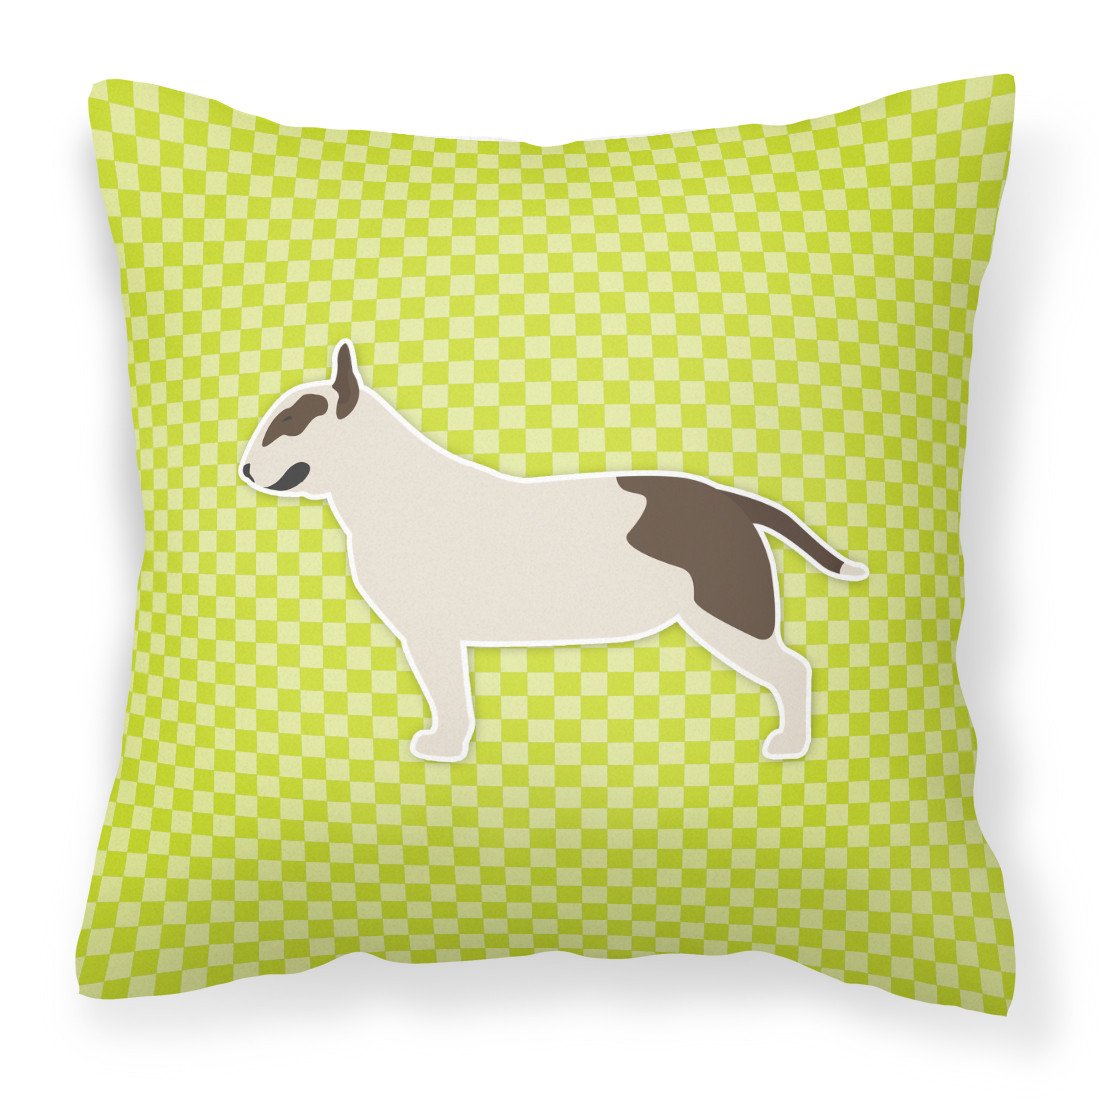 Bull Terrier Checkerboard Green Fabric Decorative Pillow BB3878PW1818 by Caroline's Treasures